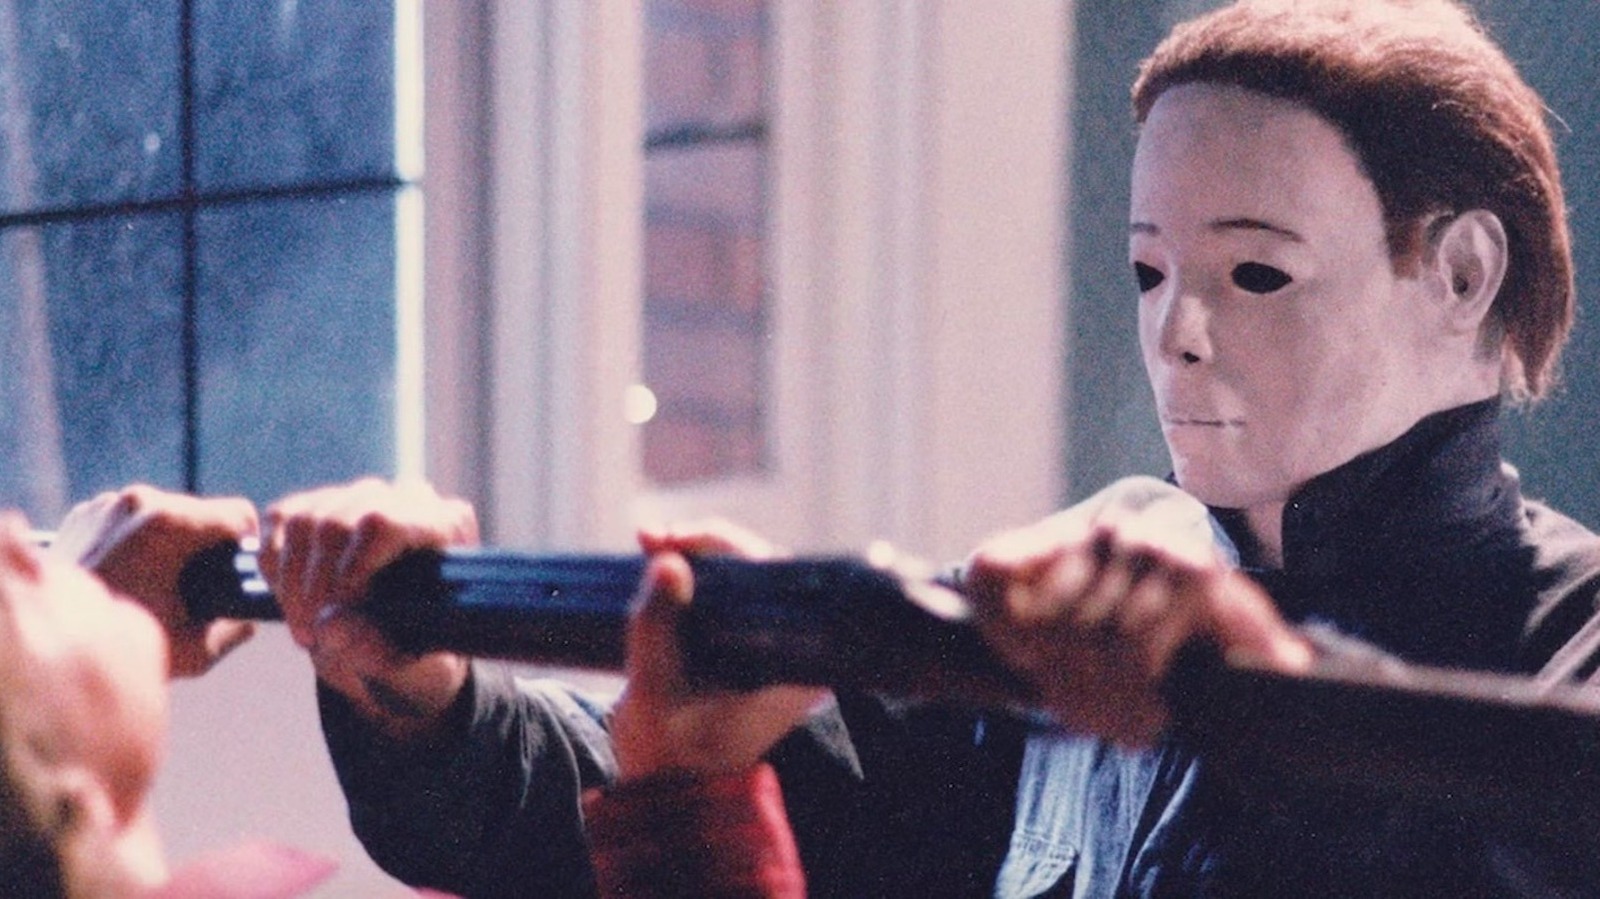 Halloween 4’s Rooftop Showdown had the whole set on pins and needles